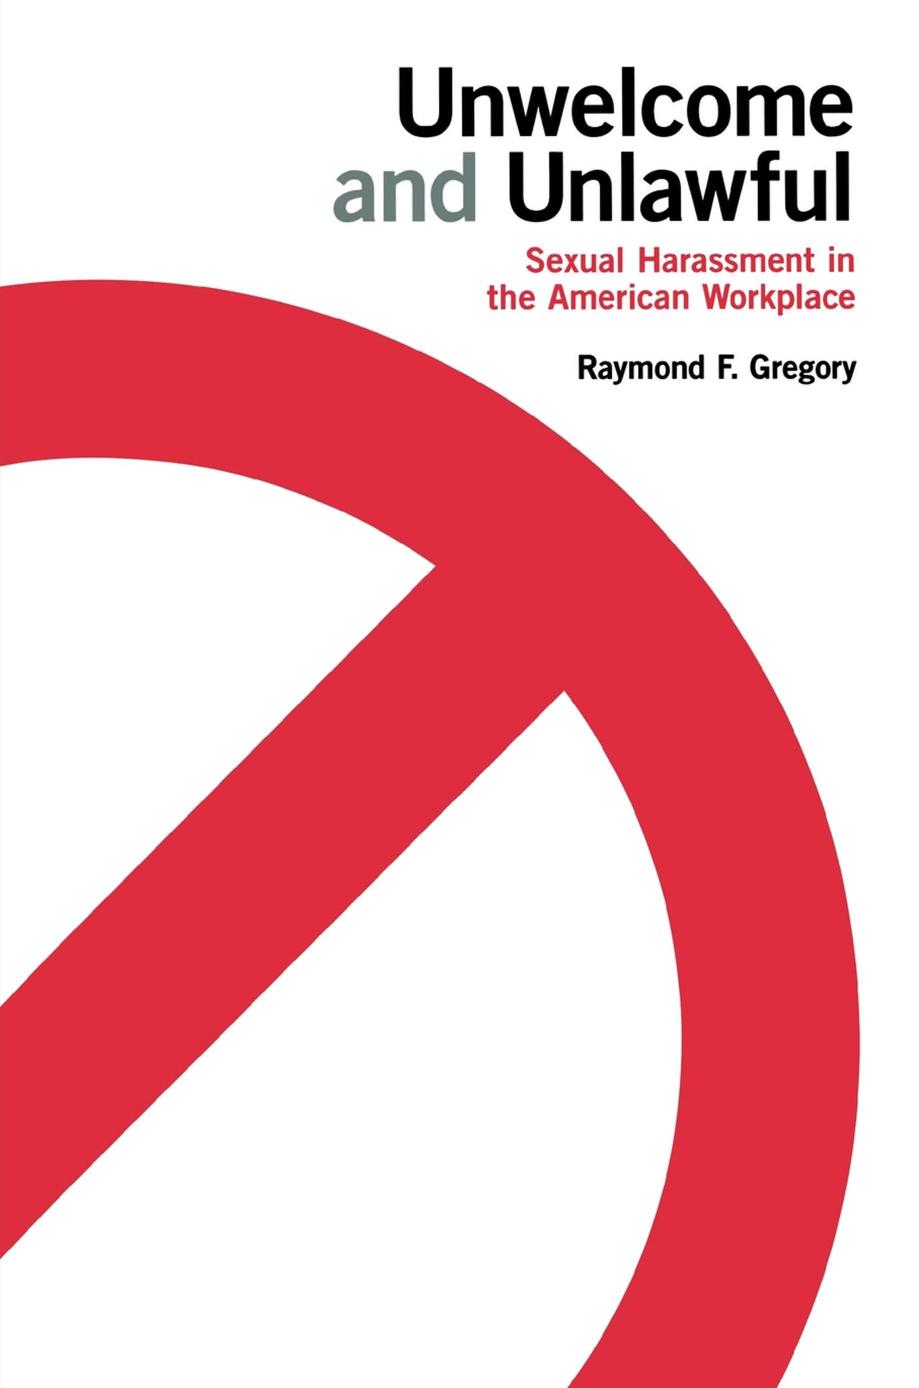 Unwelcome and Unlawful: Sexual Harassment in the American Workplace by Raymond F. Gregory